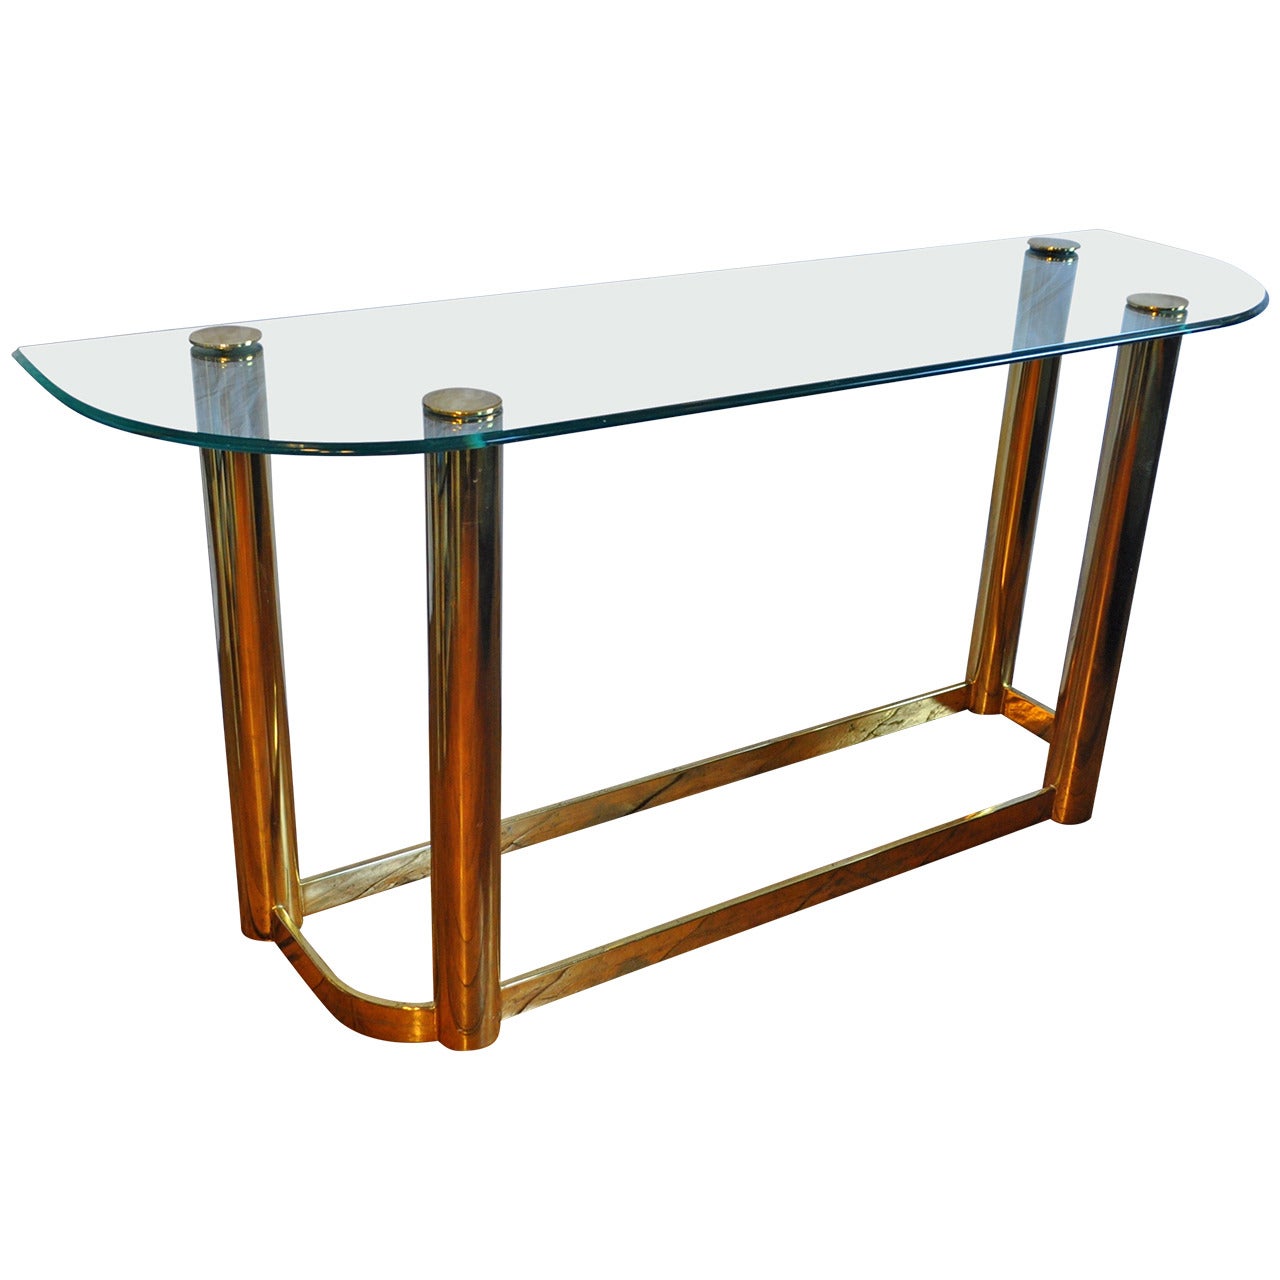 Tubular Brass and Glass Console Table